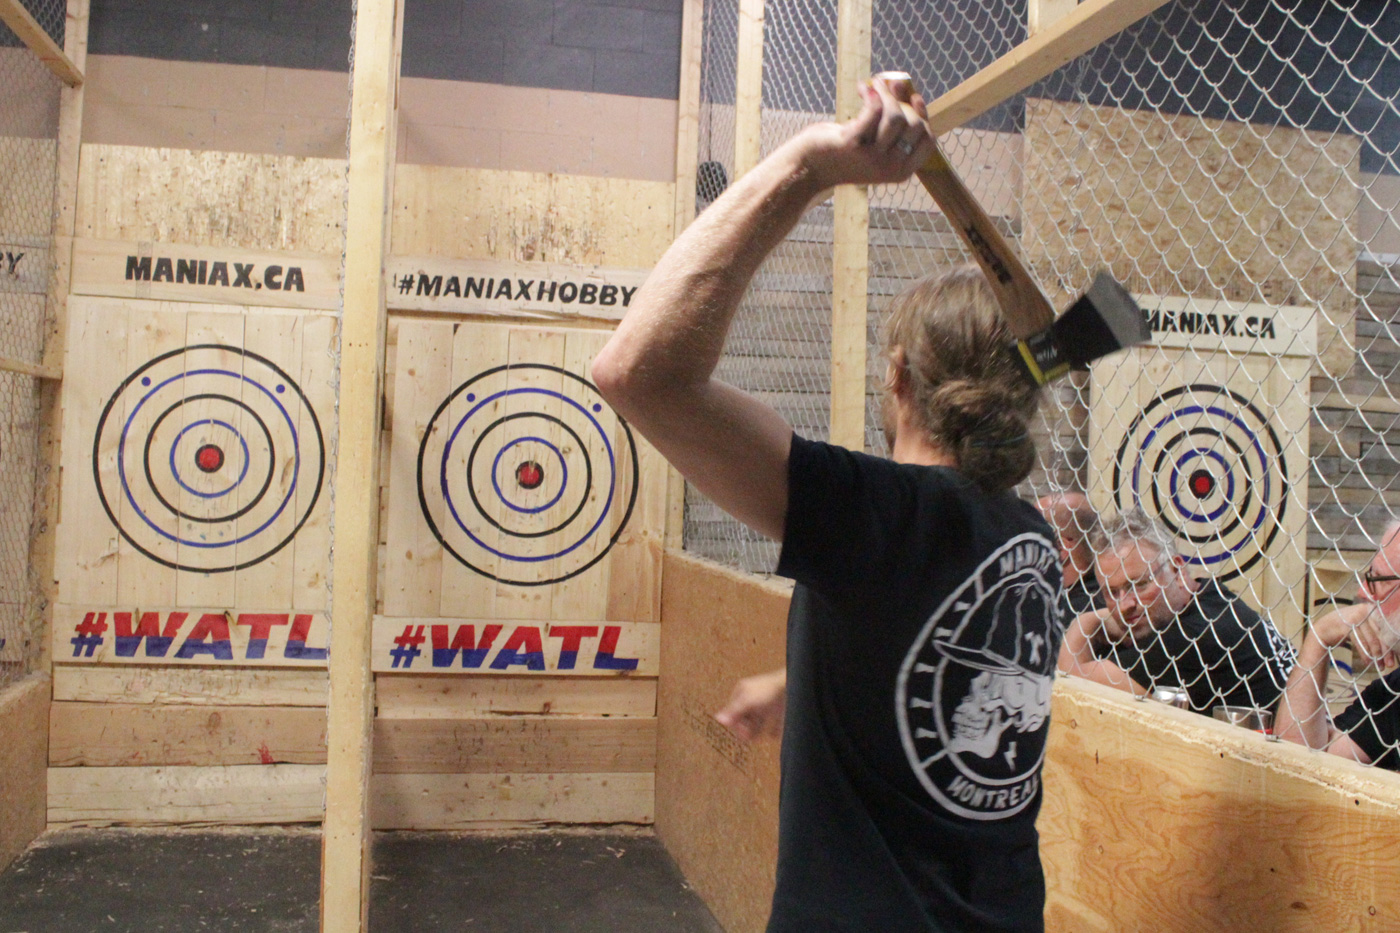 World Axe Throwing League (WATL) World Championship and the Rise of Betting on Axe Throwing